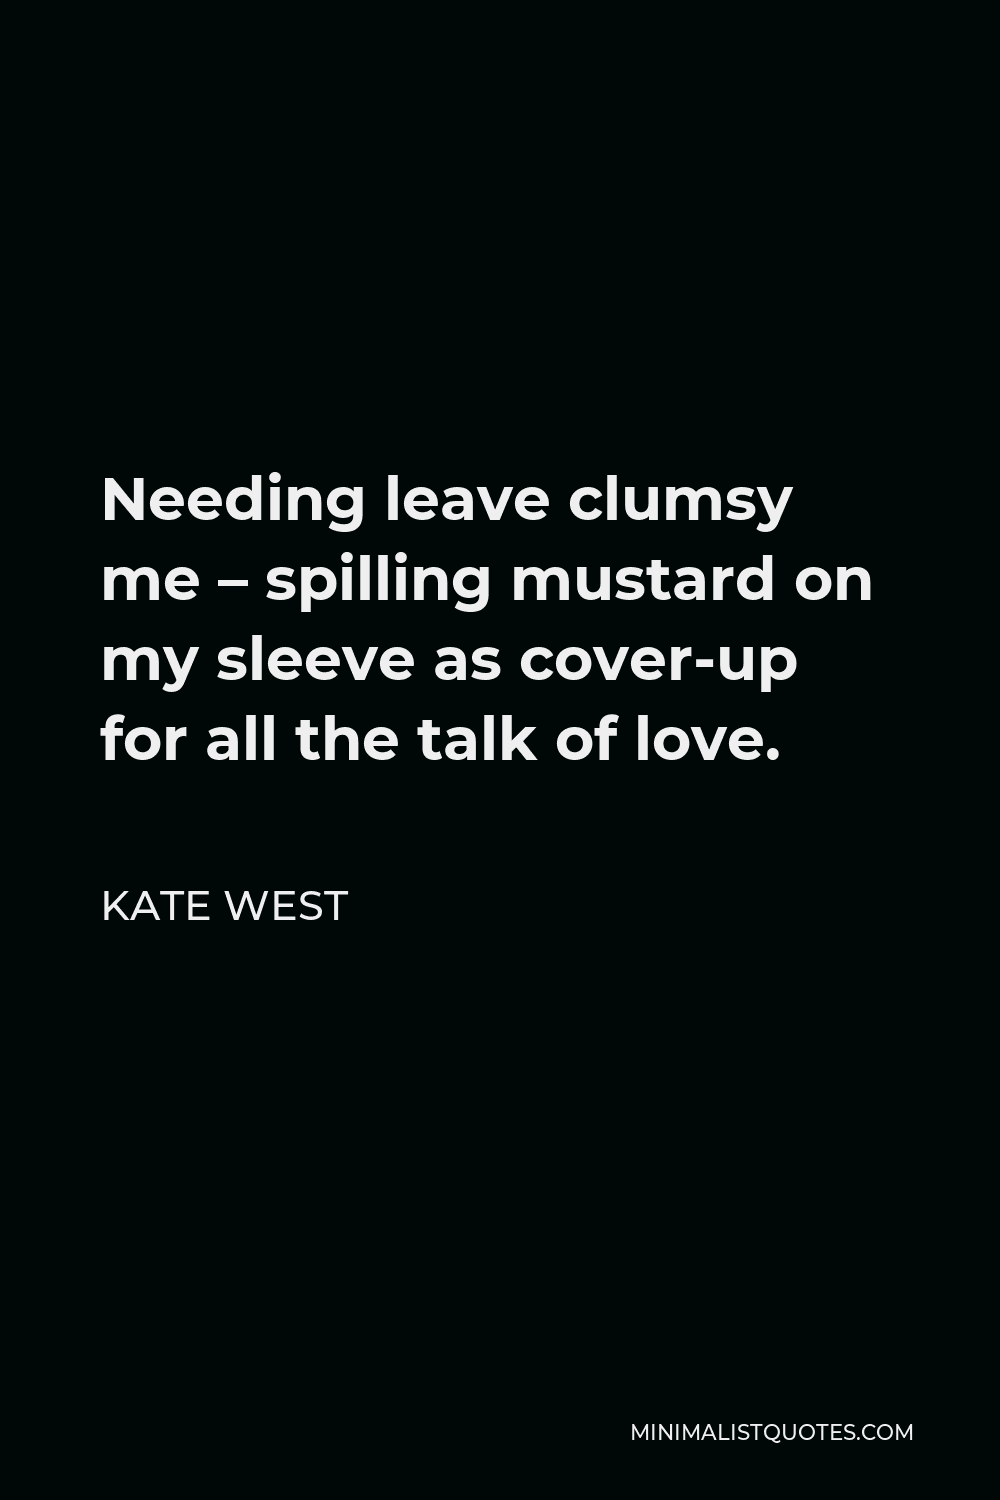 Kate West Quote - Needing leave clumsy me – spilling mustard on my sleeve as cover-up for all the talk of love.